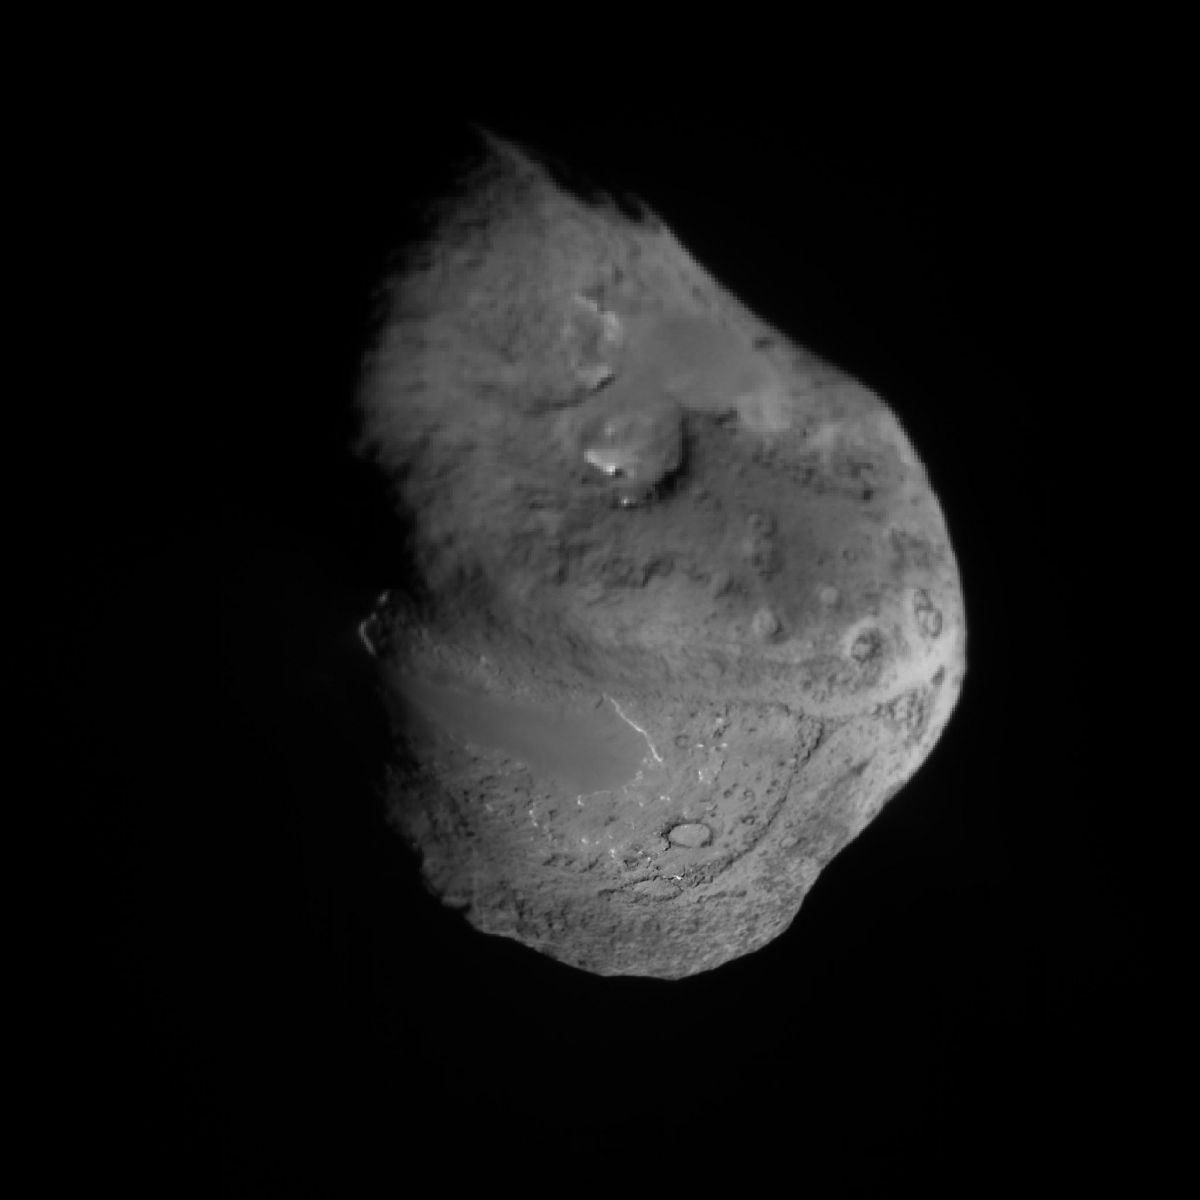 Nucleus of comet Tempel 1 imaged by the NASA deep impact mission